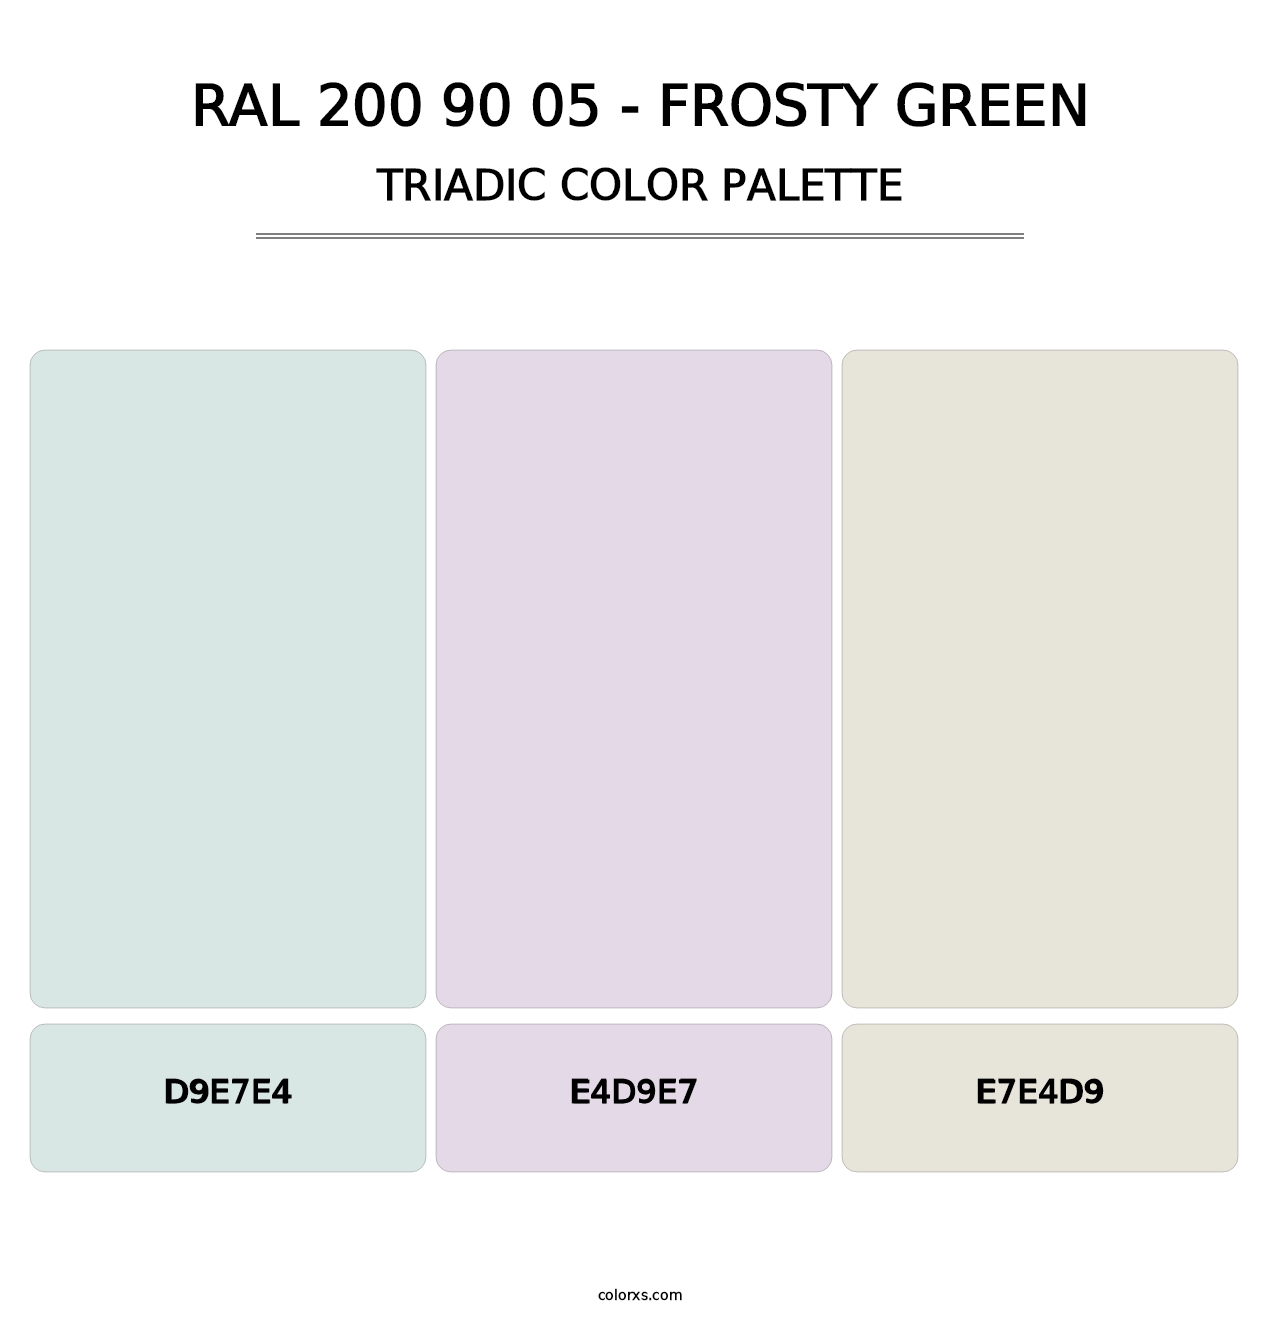 RAL 200 90 05 - Frosty Green - Triadic Color Palette